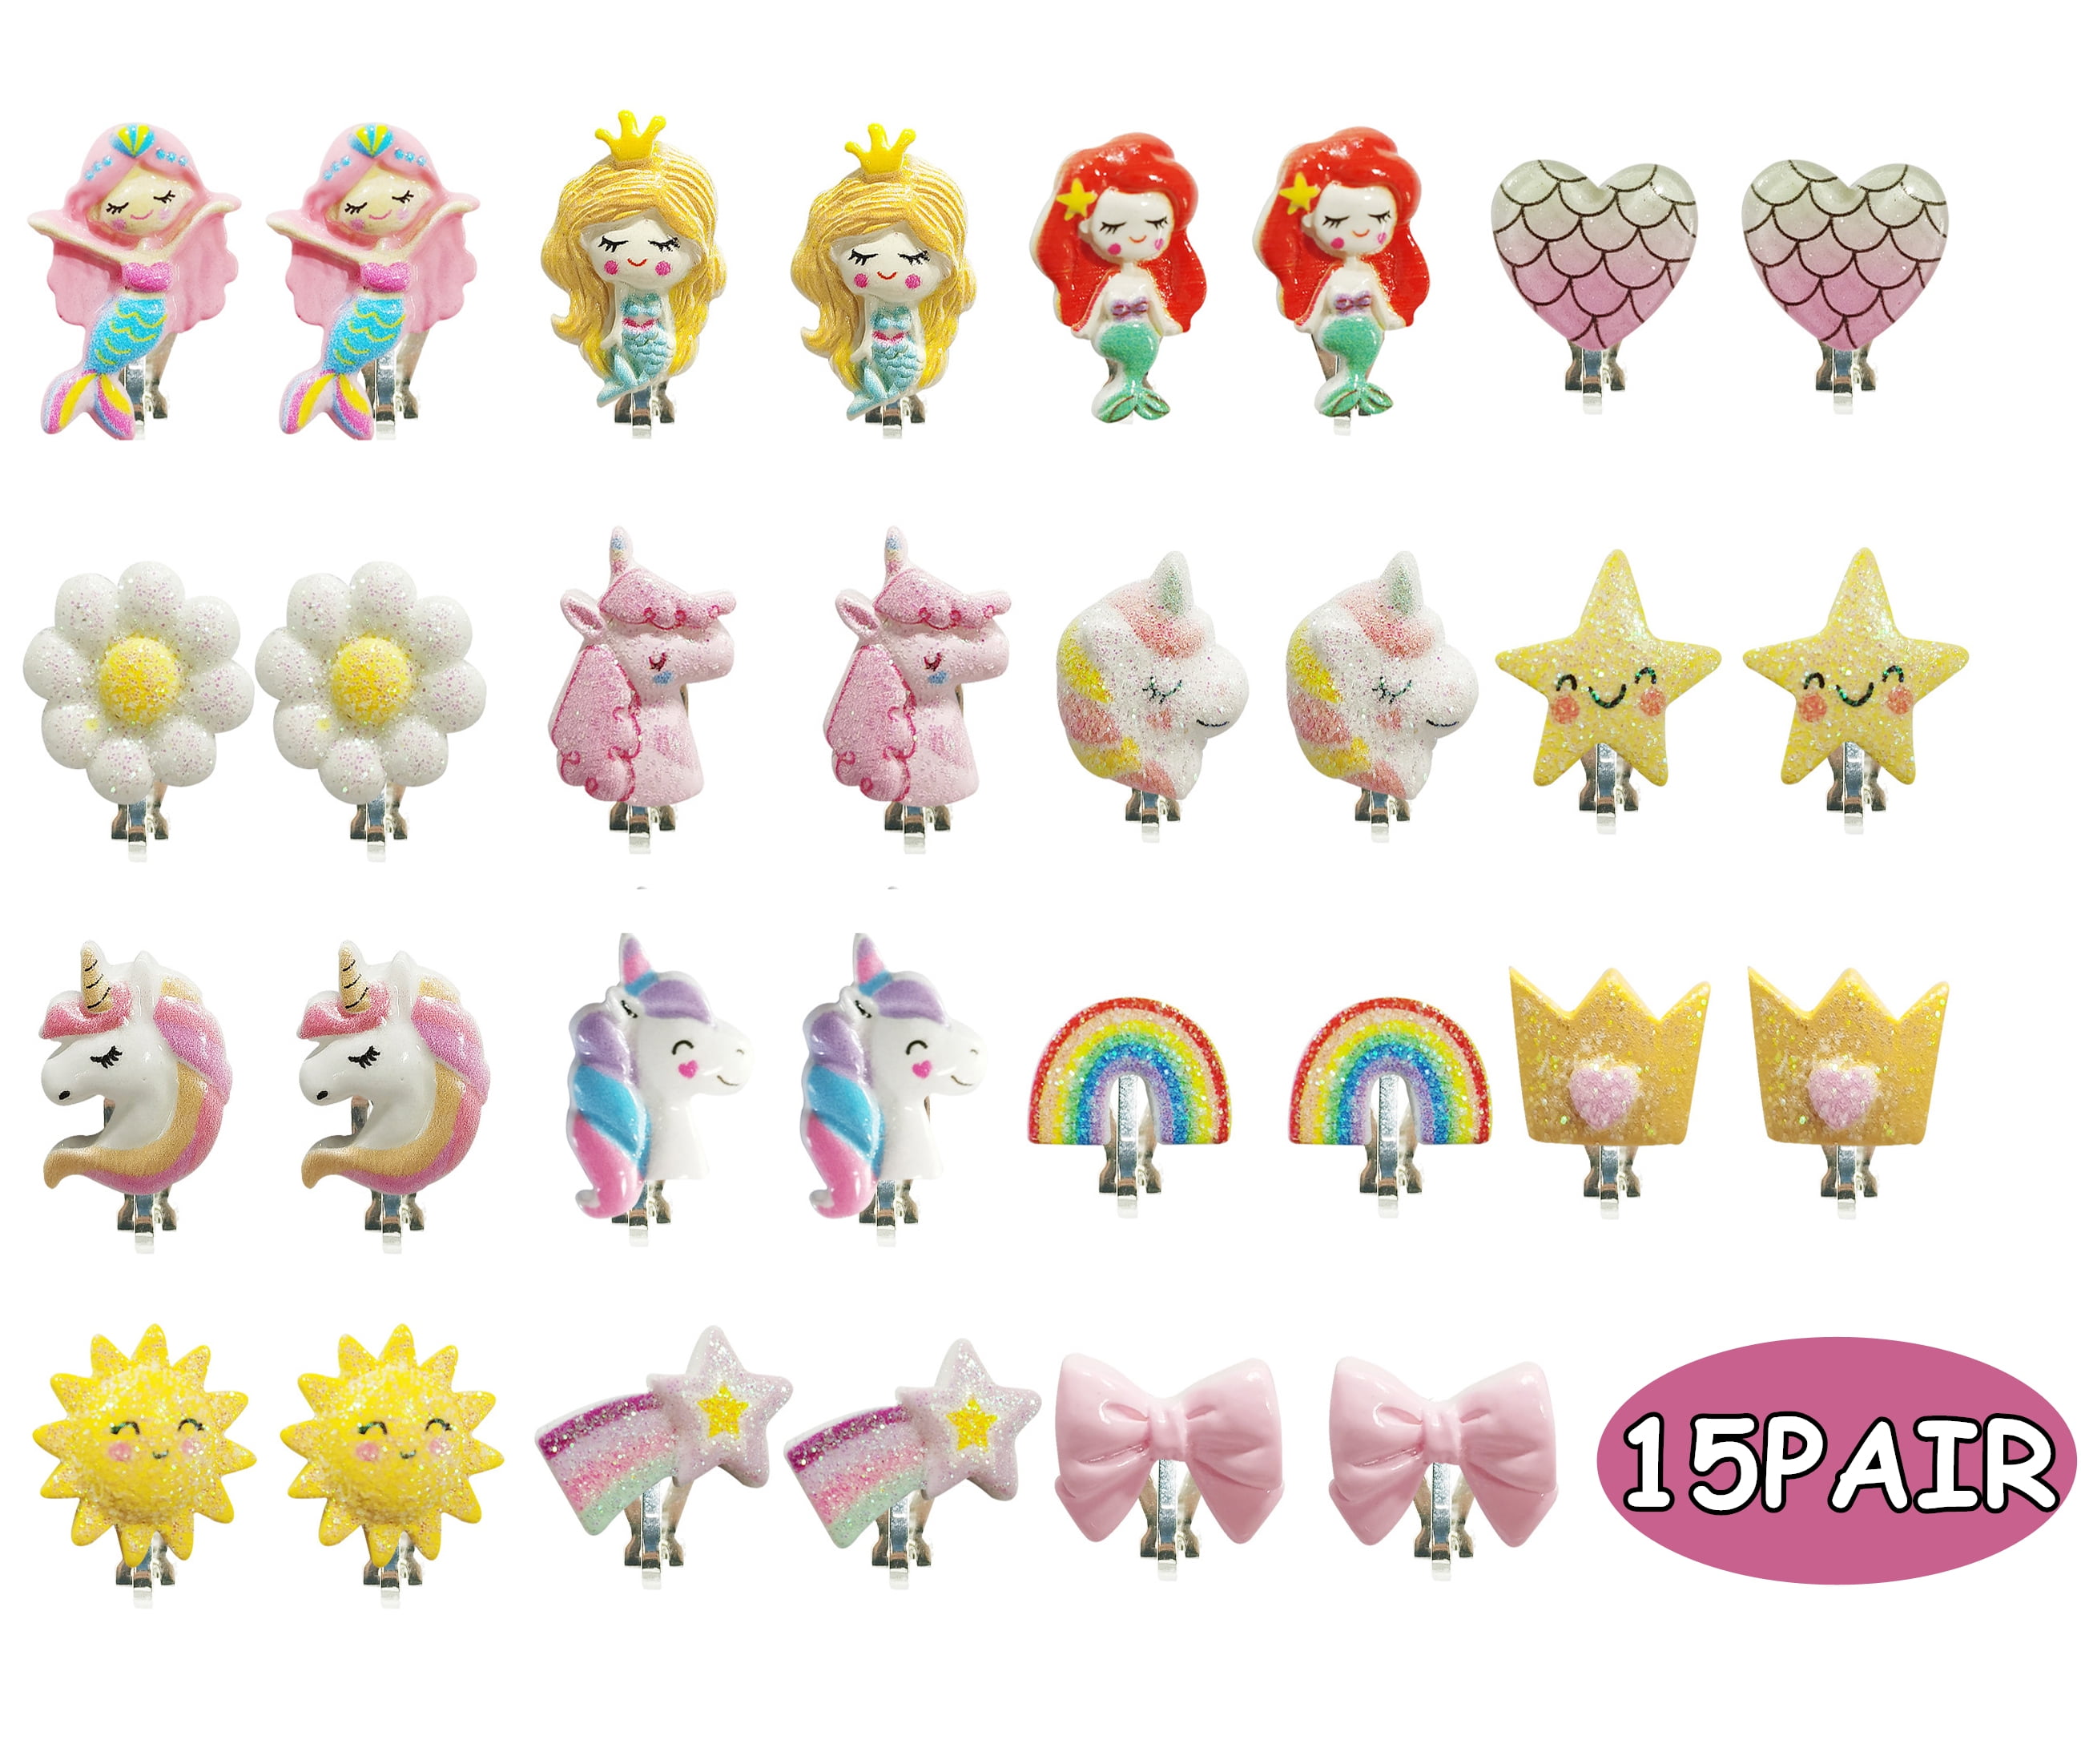  Clip On Earrings for Girls, 10 Pairs Party Favor Pretend  Princess Play Jewelry for Little Girls Clip On Earrings Kids Toddler Cute  Unicorn Dangle Earrings for Ages 4-6,7, 8,10,12 : Toys & Games